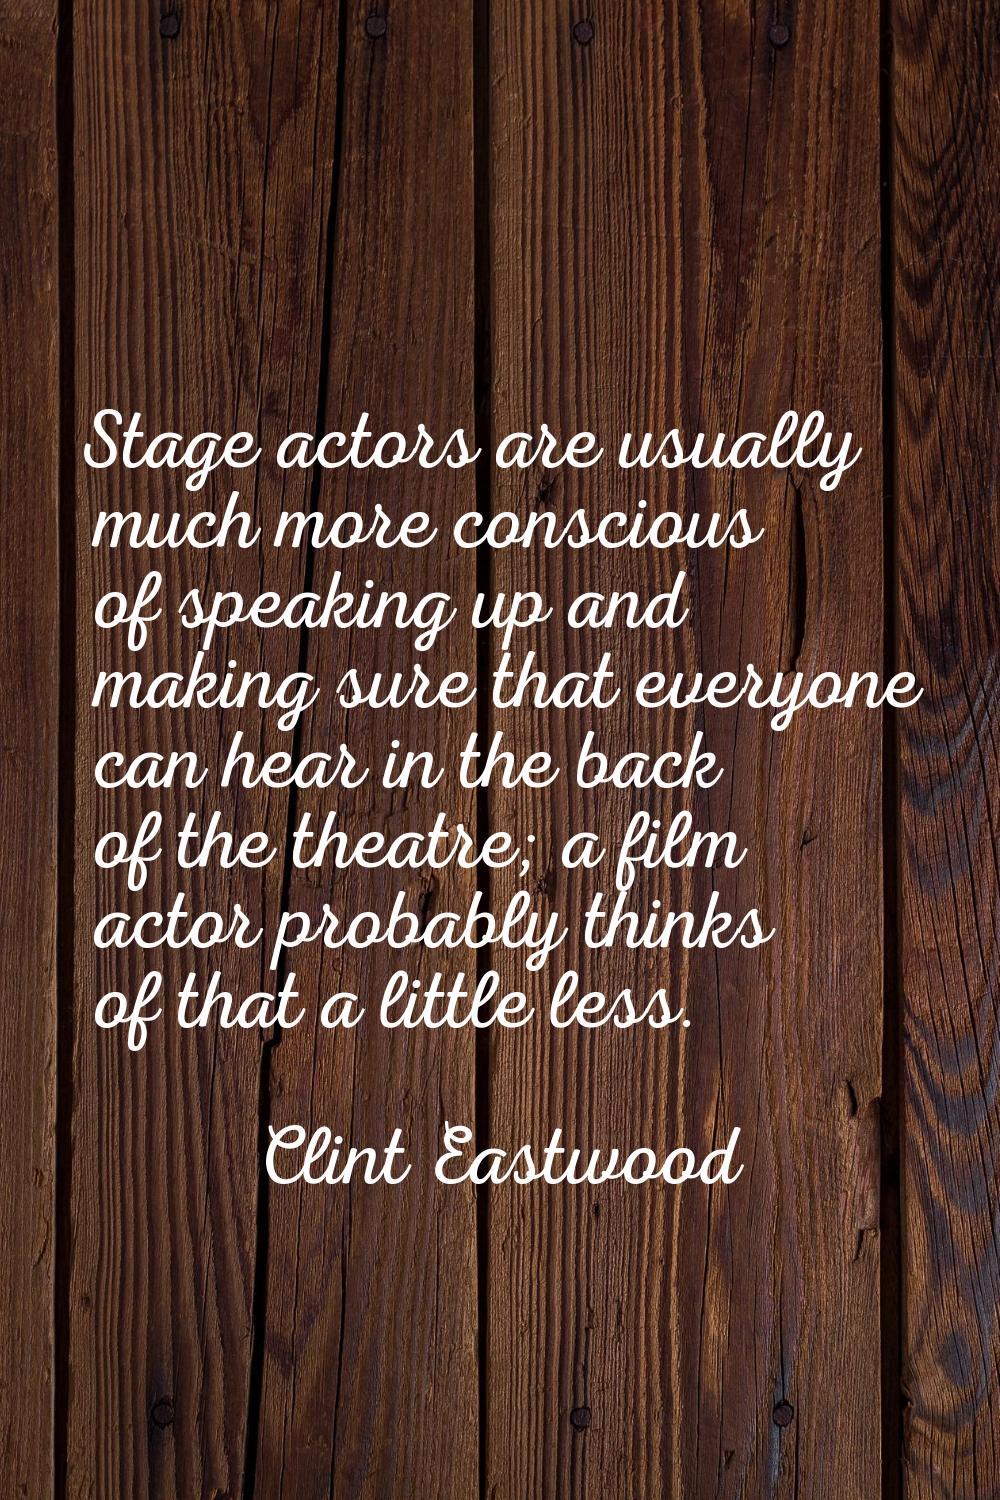 Stage actors are usually much more conscious of speaking up and making sure that everyone can hear 